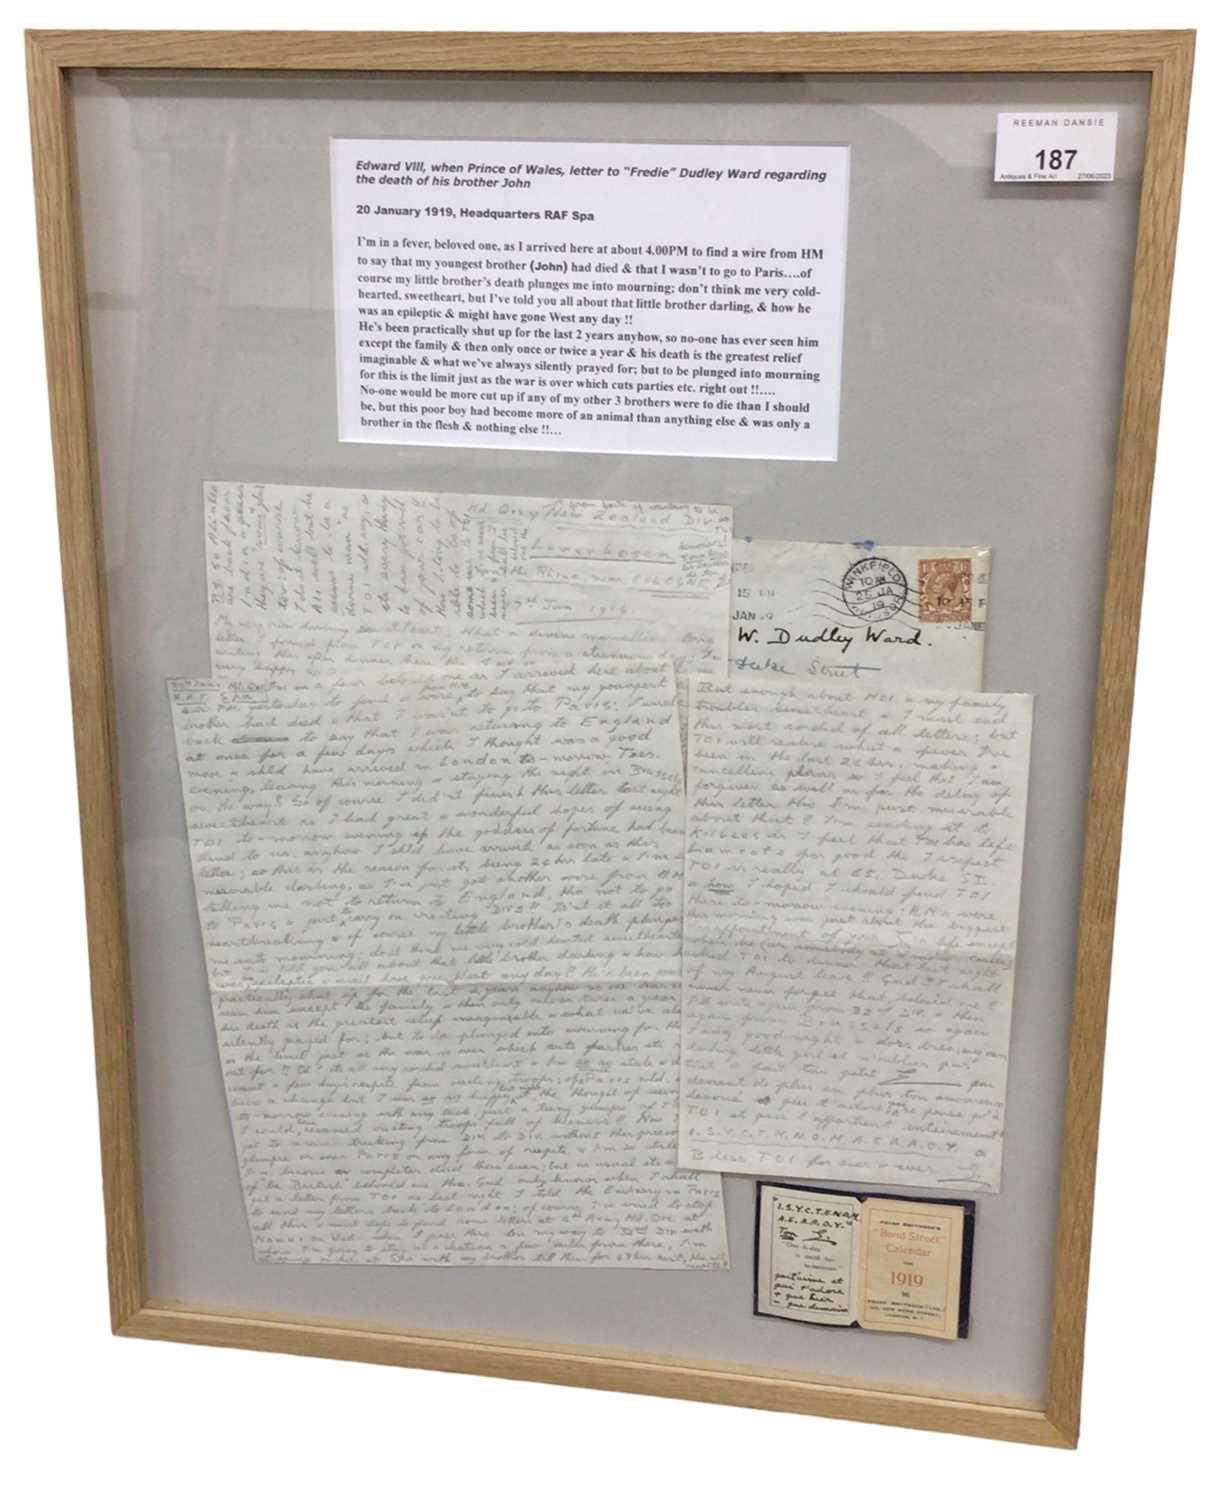 Lot 187 - H.R.H. Edward Prince of Wales (later H.M. King Edward VIII and Duke of Windsor)love letter to Freda Dudley Ward regarding death of Prince John